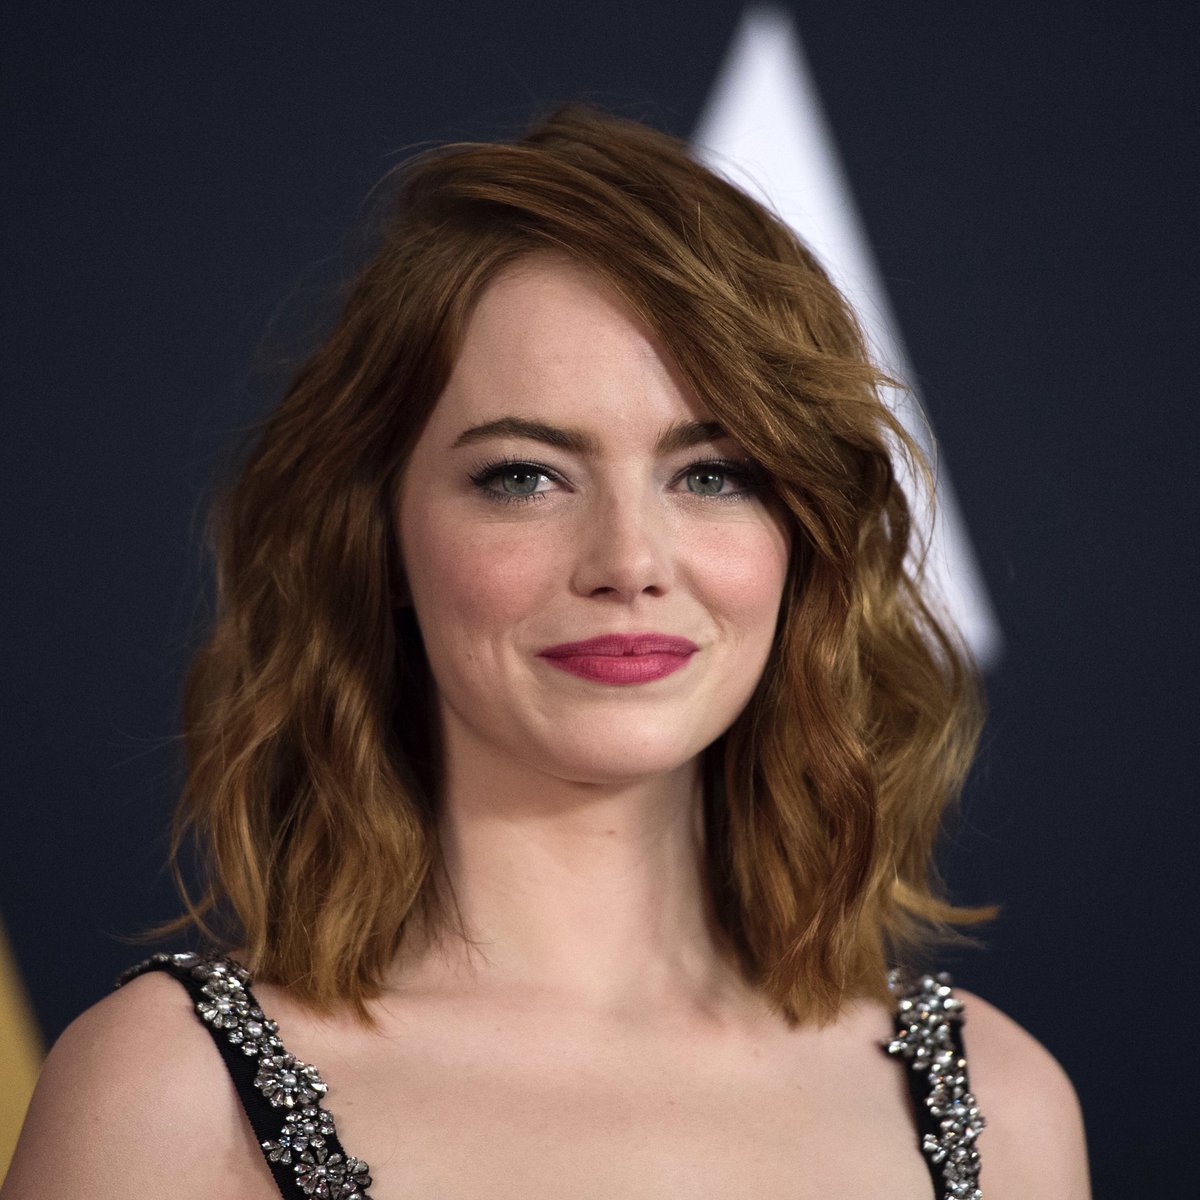 Emma Stone was originally cast as Meg in Greta Gerwig’s adaptation of Little Women but had to drop out due to promotional commitments for The Favourite. Emma Watson was eventually cast in the role.